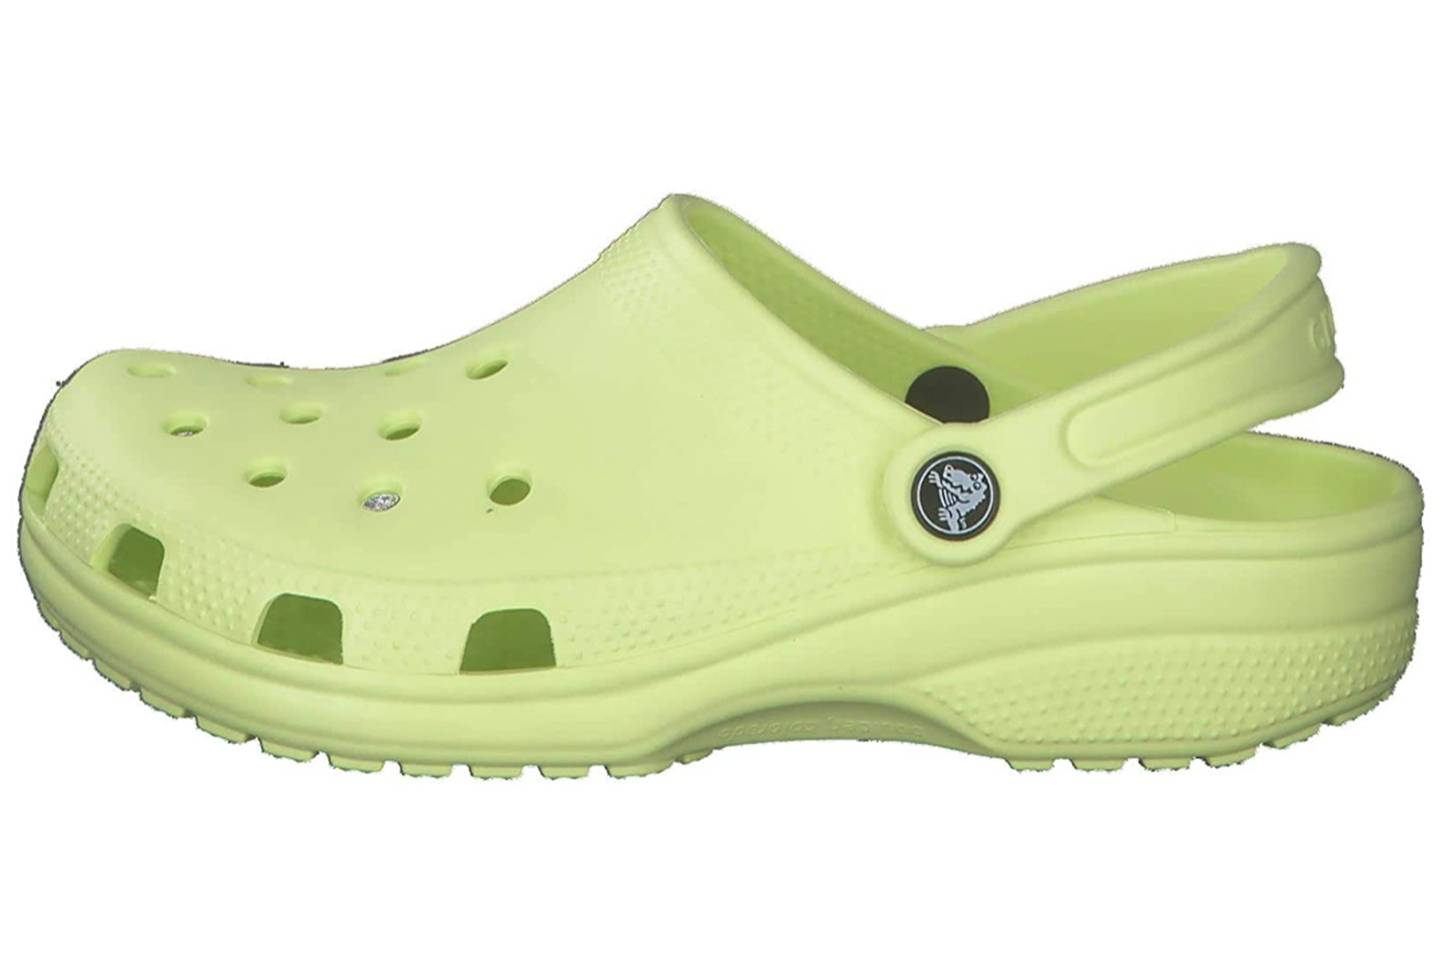 Crocs Are The Divisive Shoes Taking Over Summer 2021 | Glamour UK